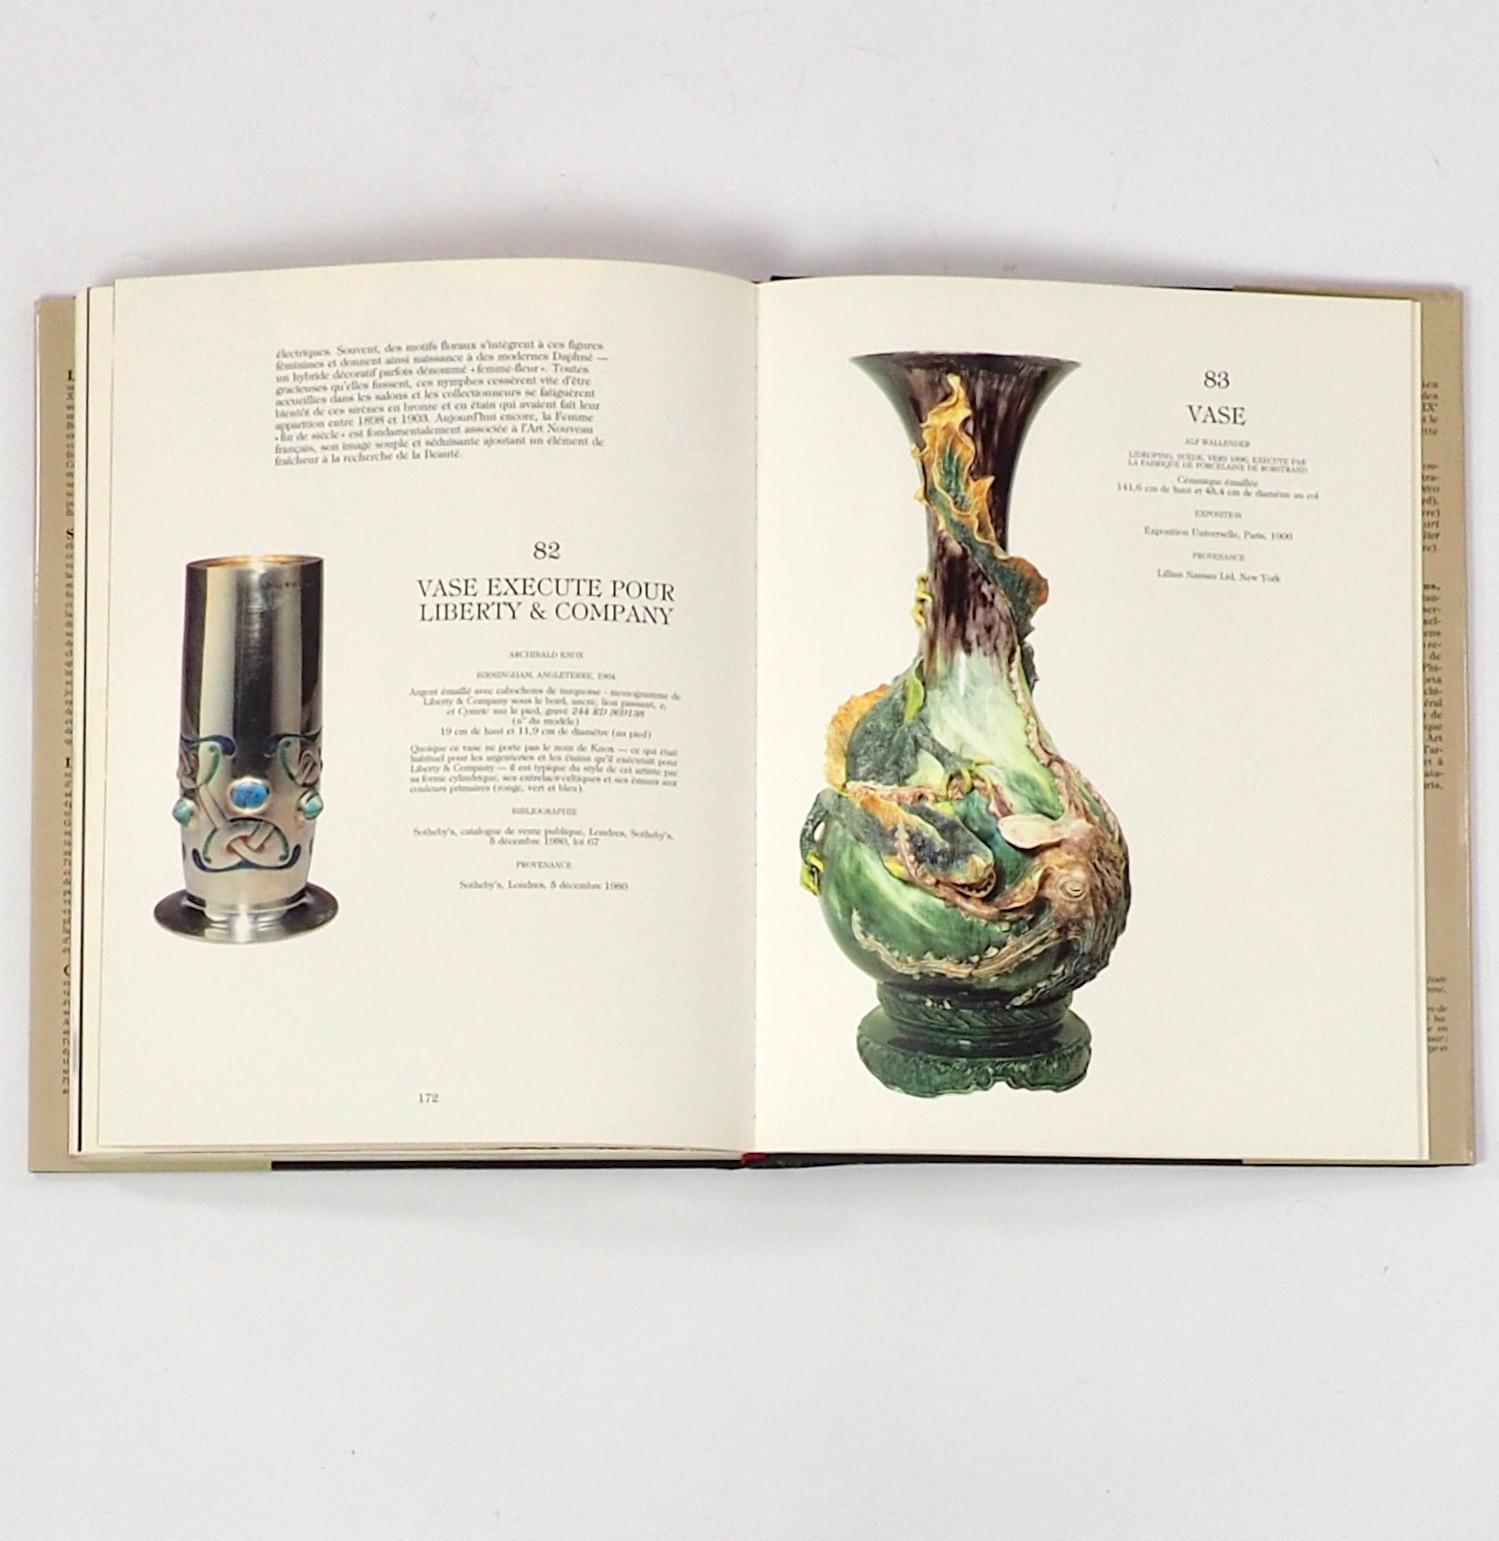 Alastair Duncan. Chefs d’Ouvre Fin de Siecle de la Collection Silverman. Published by Bordas, 1989 Paris. 
 
Masterpieces of the Fin de Siecle and Art Nouveau style from the Silverman collection. This book provides a richly illustrated resource on